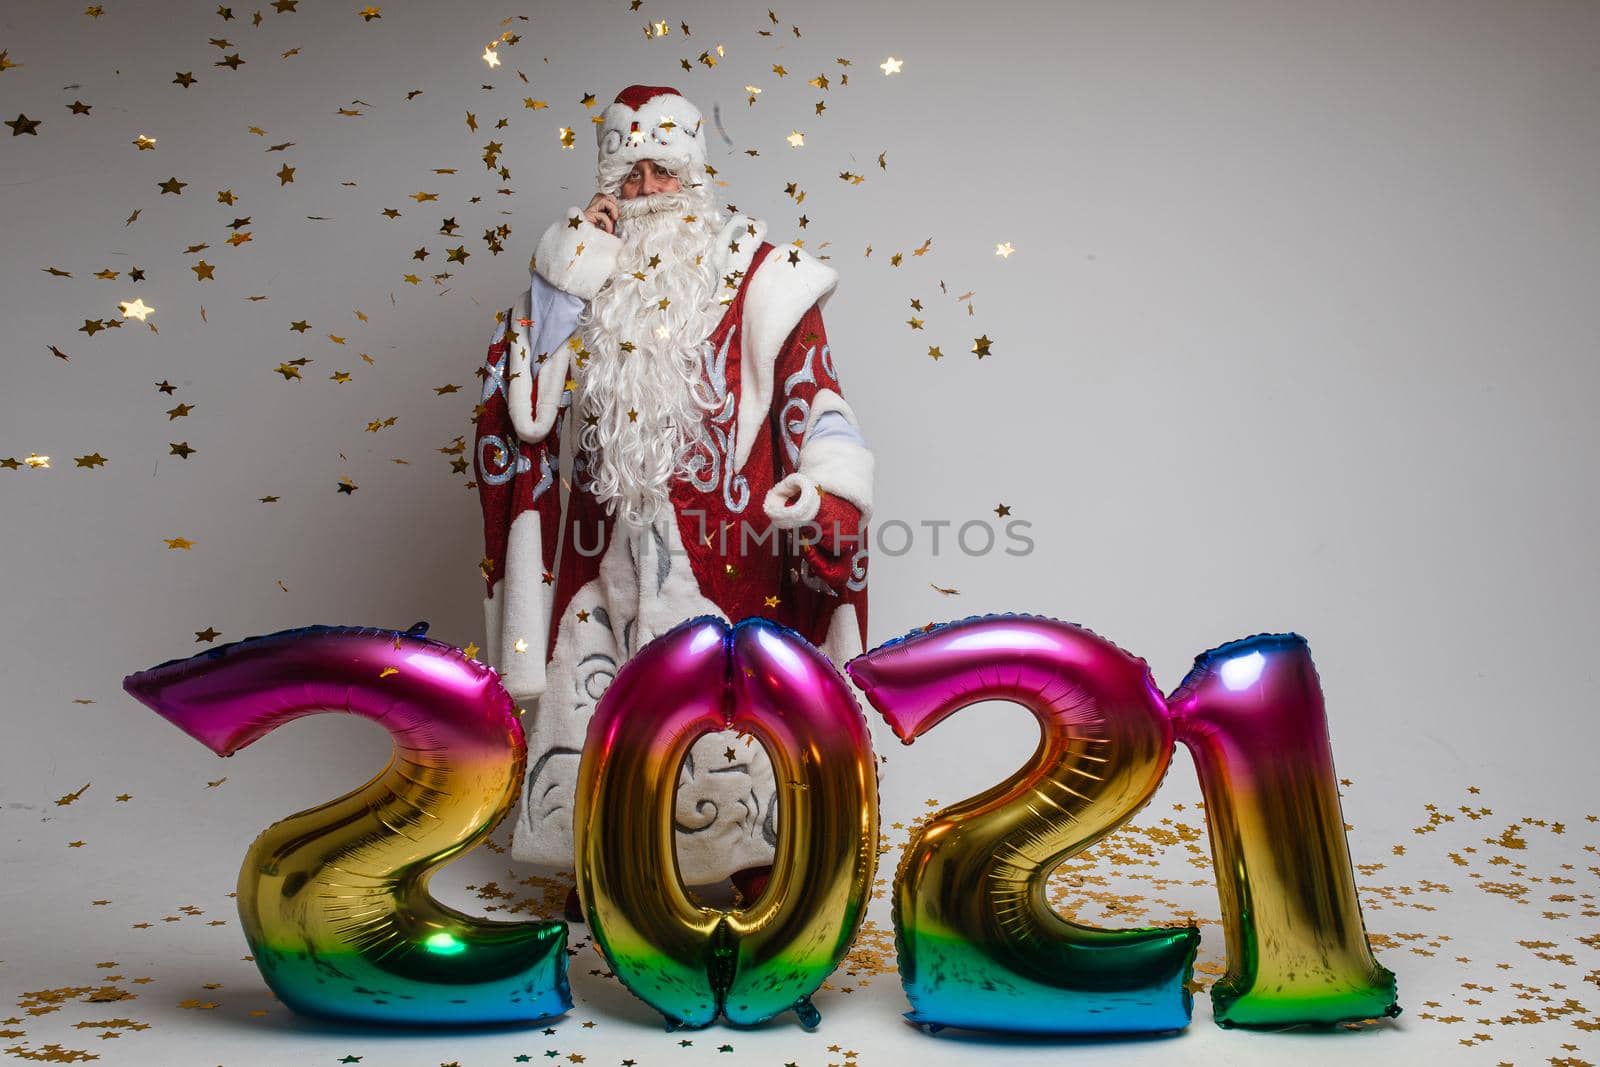 2021 new year celebration, santa claus with colorful balloons and confetti on gray studio background, copy space. High quality photo